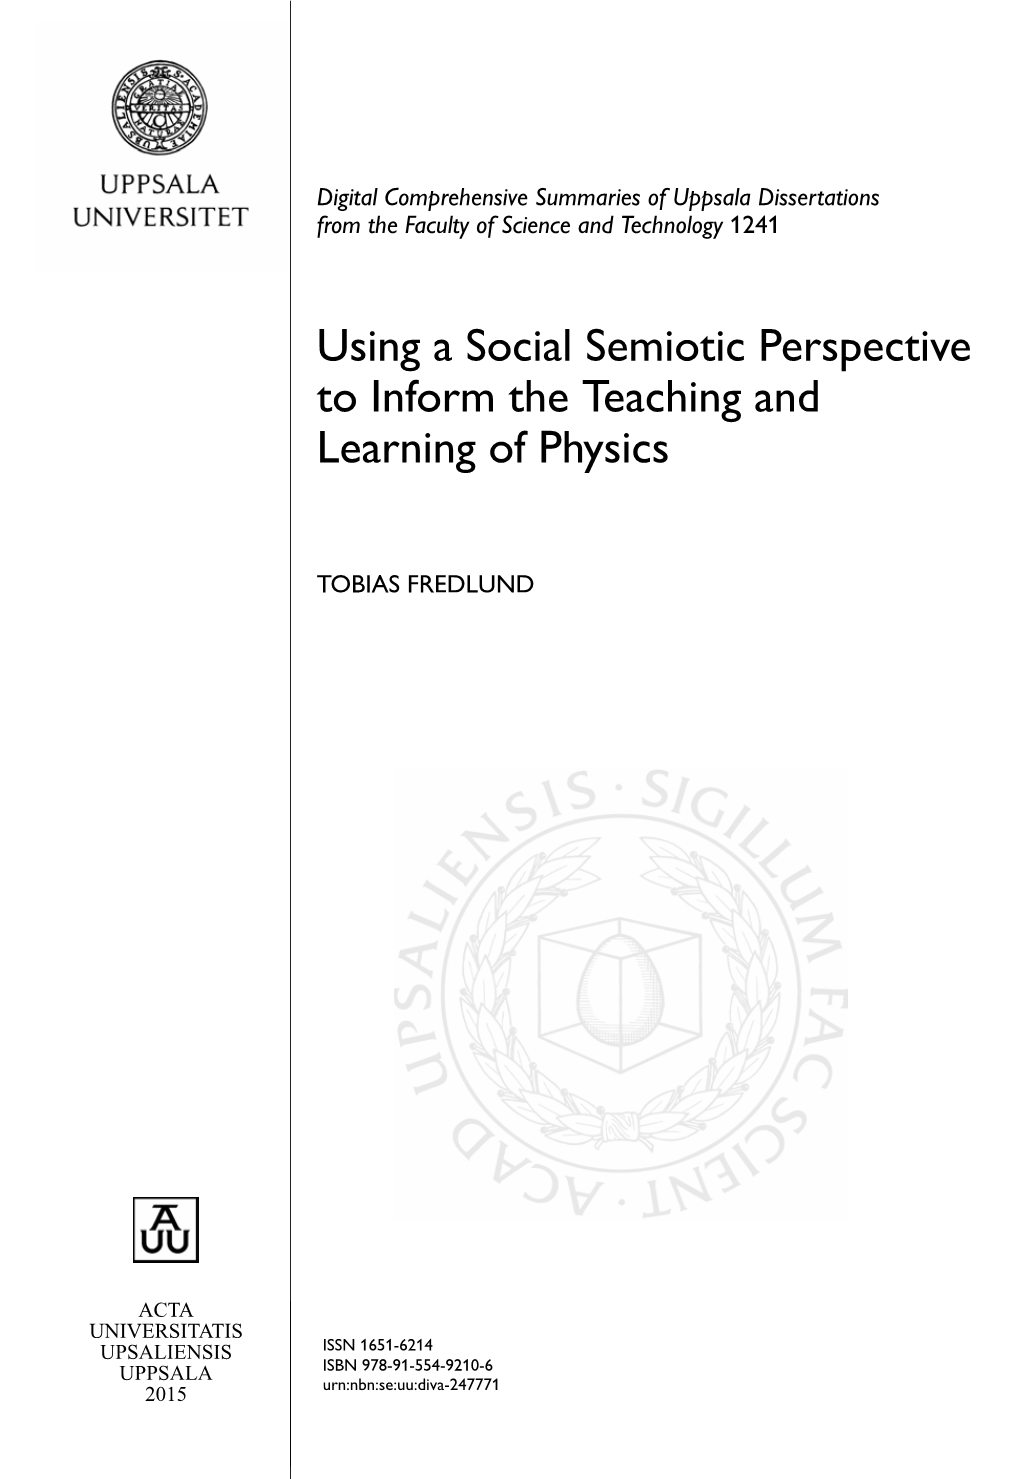 Using a Social Semiotic Perspective to Inform the Teaching and Learning of Physics